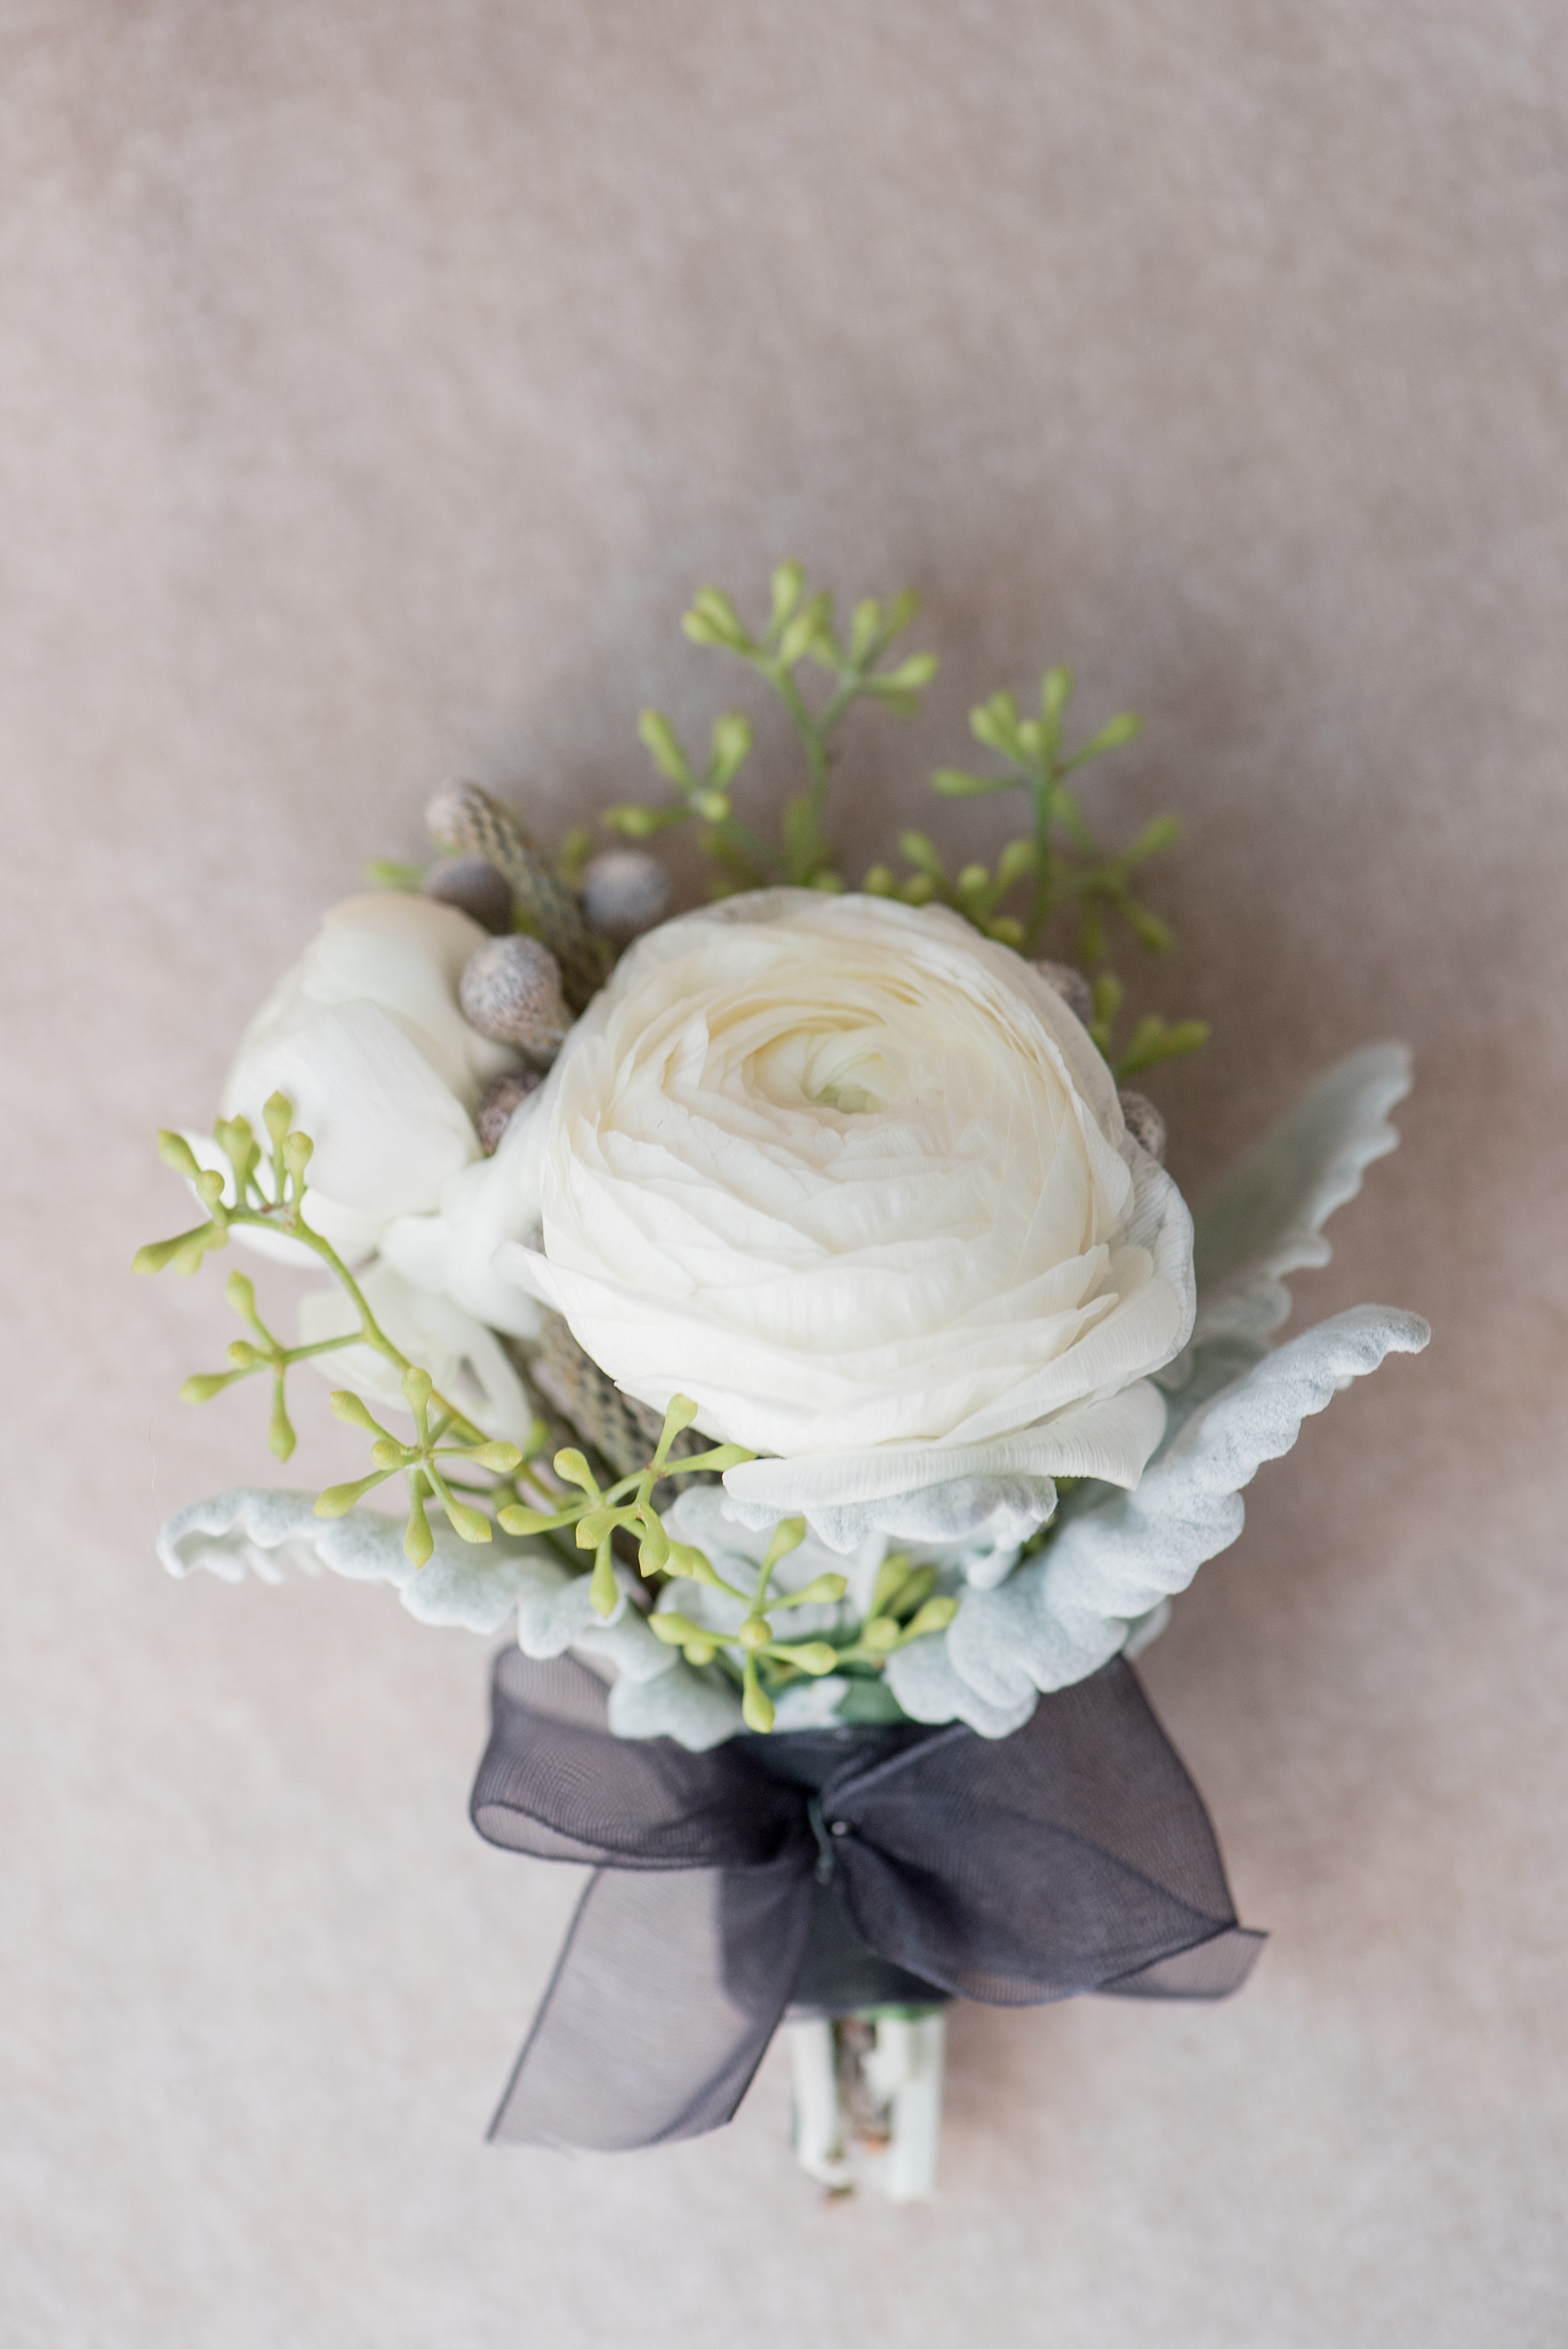 Mikkel Paige Photography photos of a luxury wedding in NYC. Image of the groom's white ranunculus boutonniere.